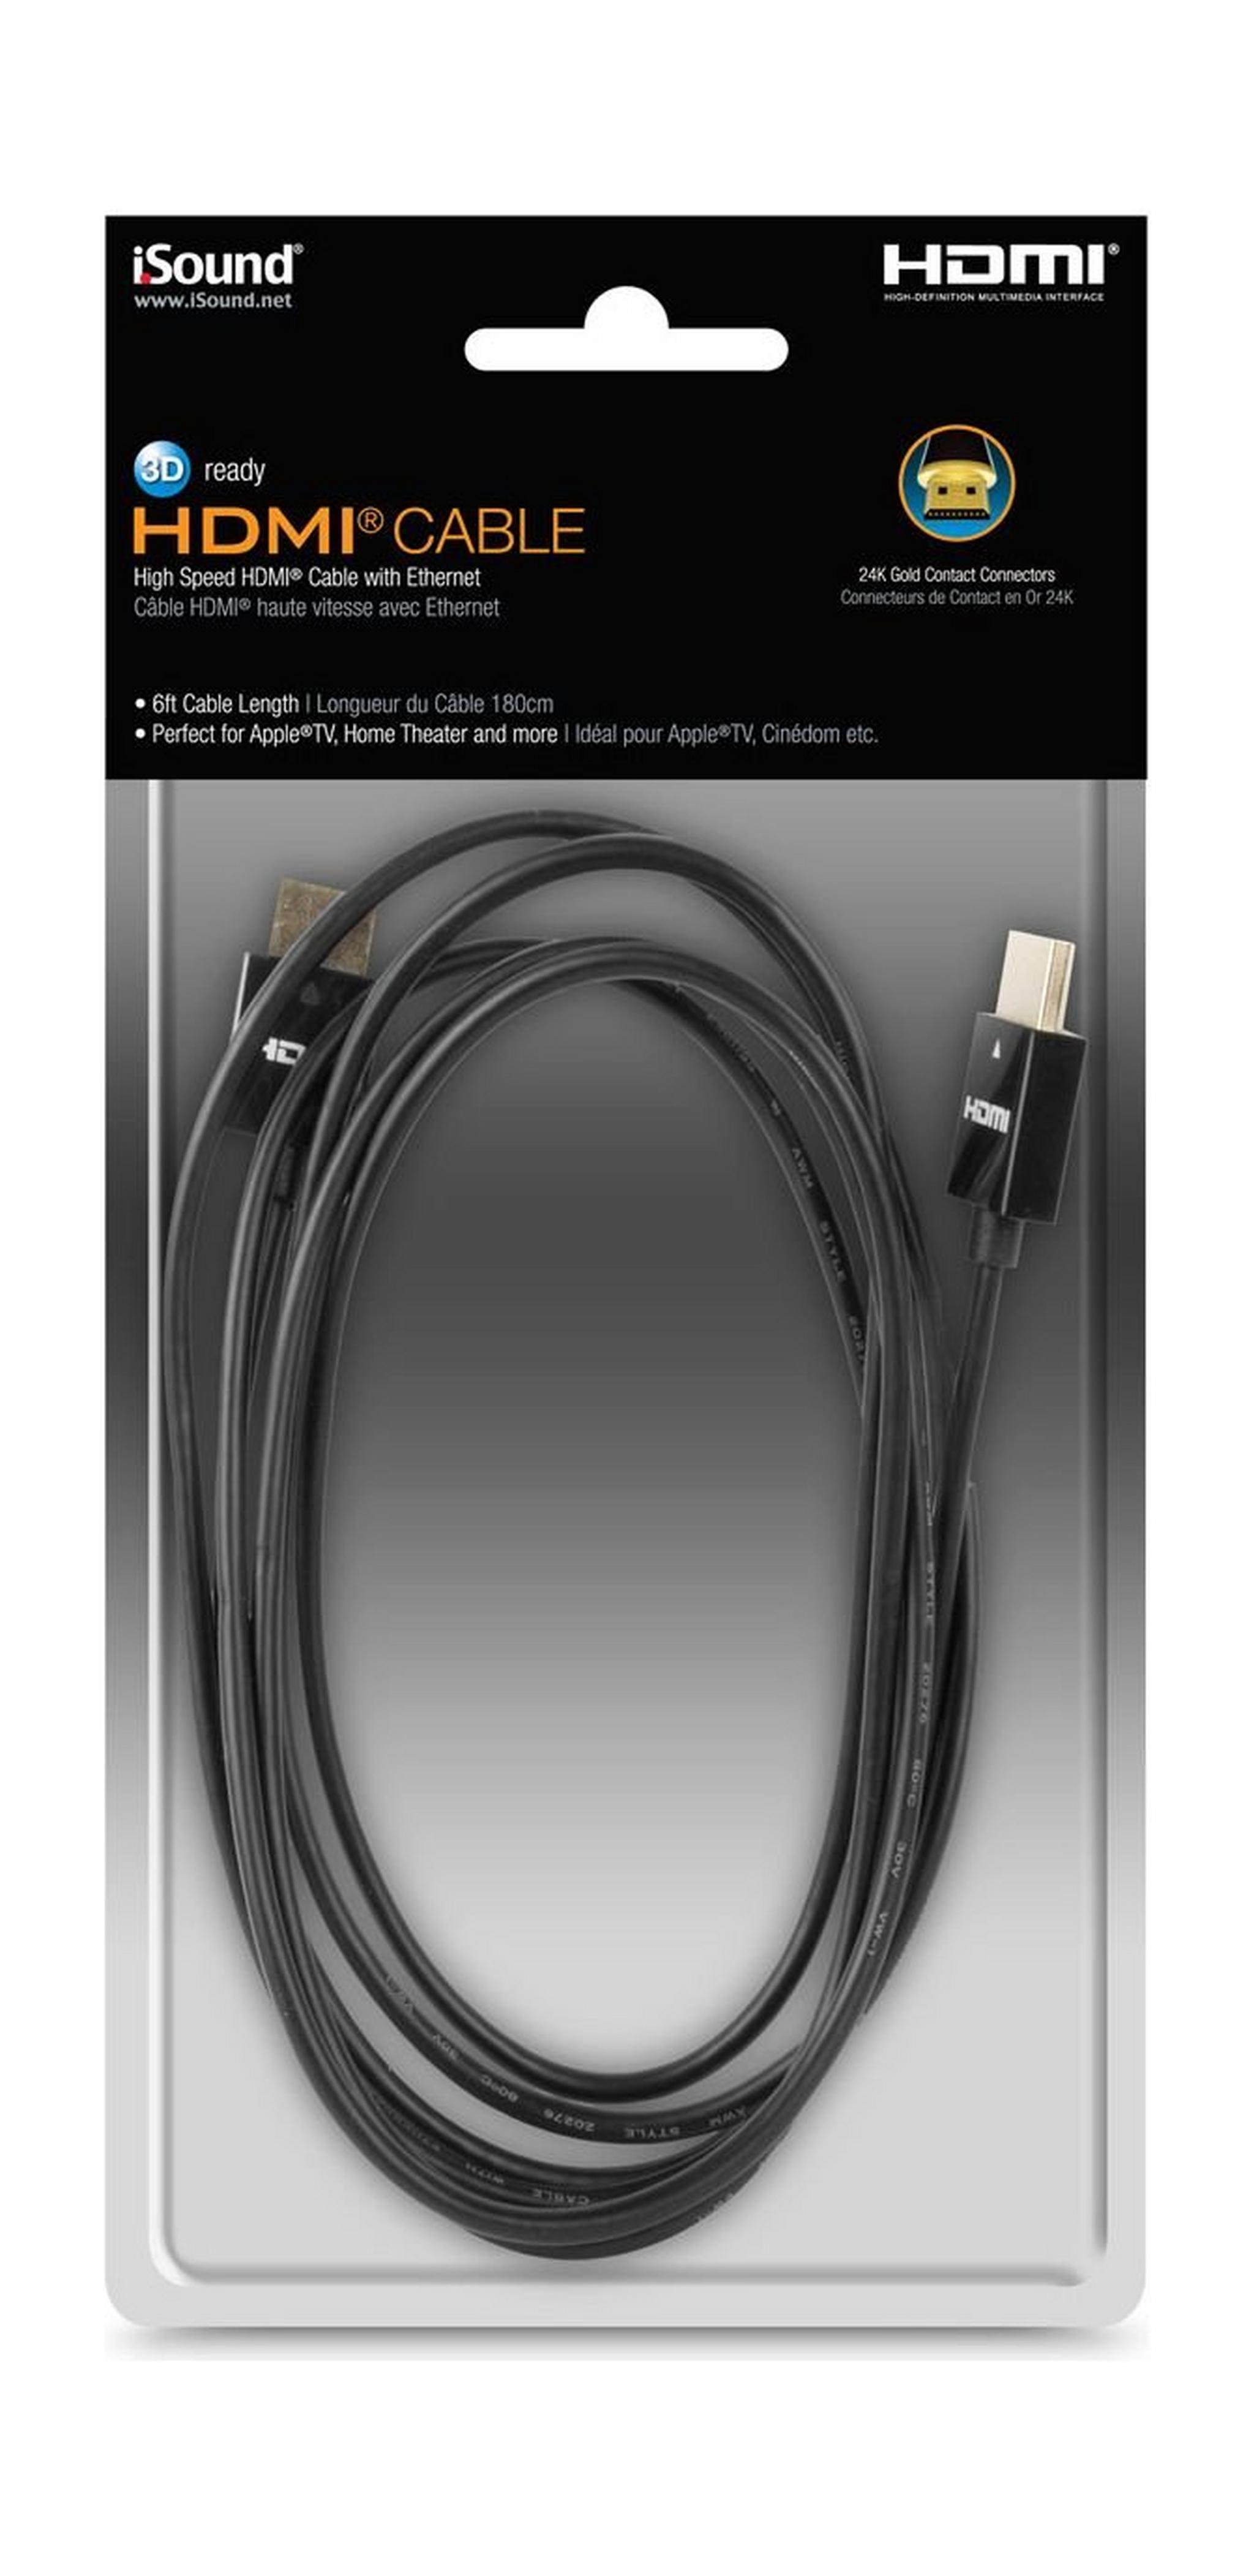 Dream Gear Super Slim HDMI Cable With Ethernet (ISOUND-5350) - Black